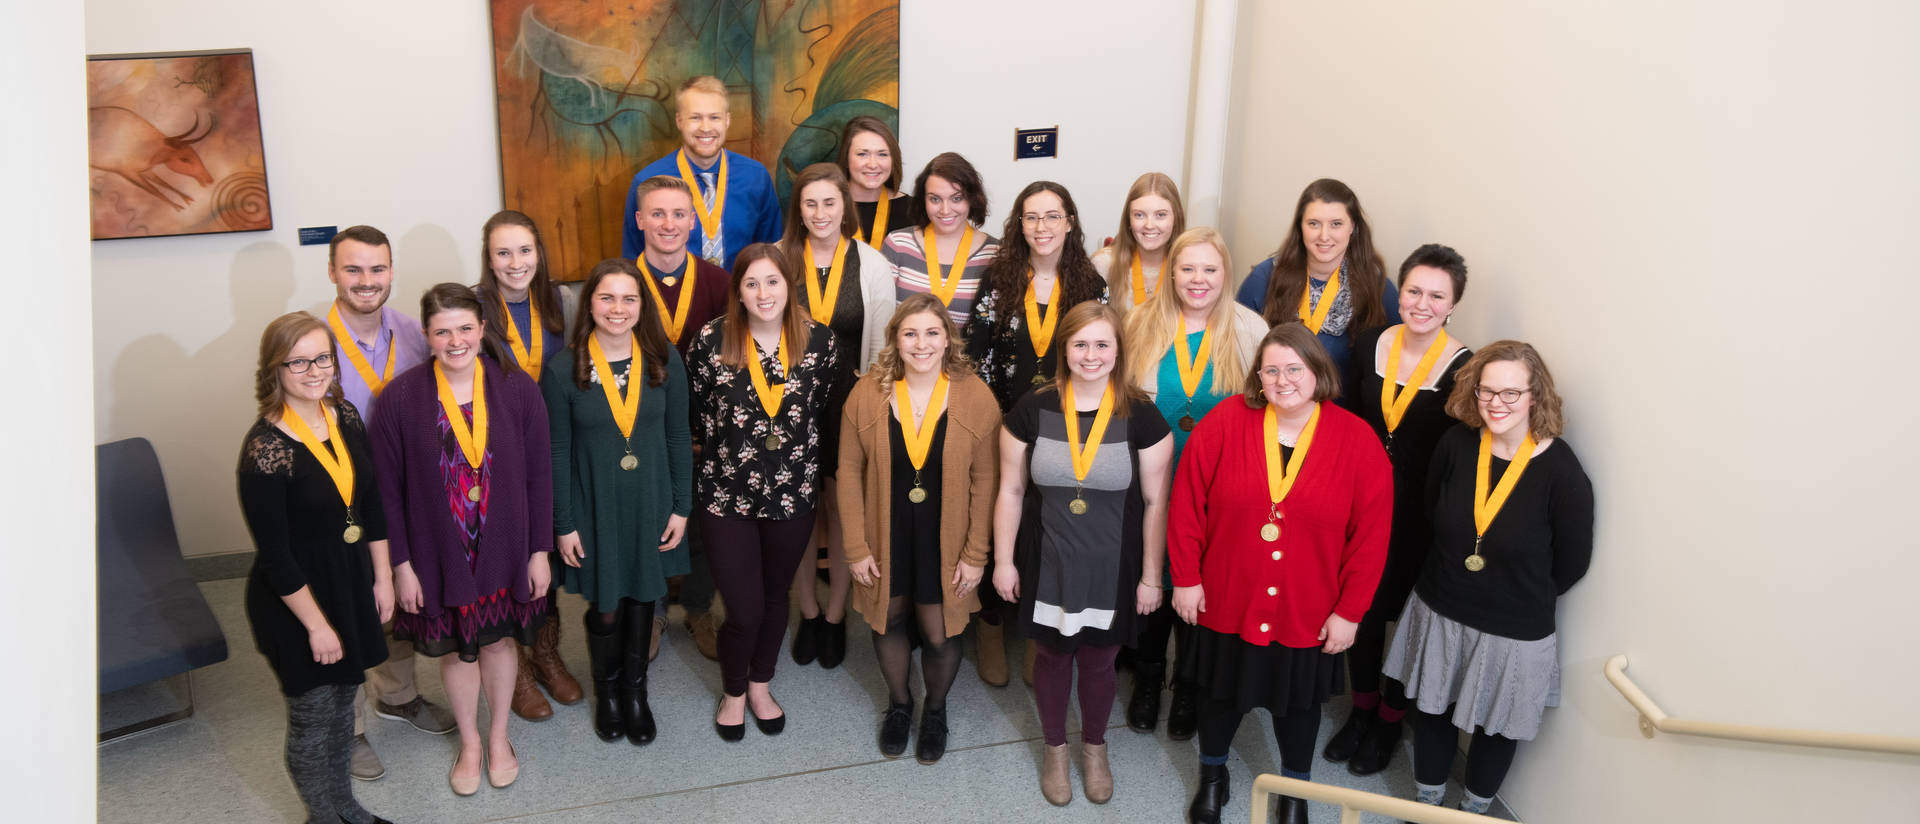 Students pose at an honors ceremony wearing medals.